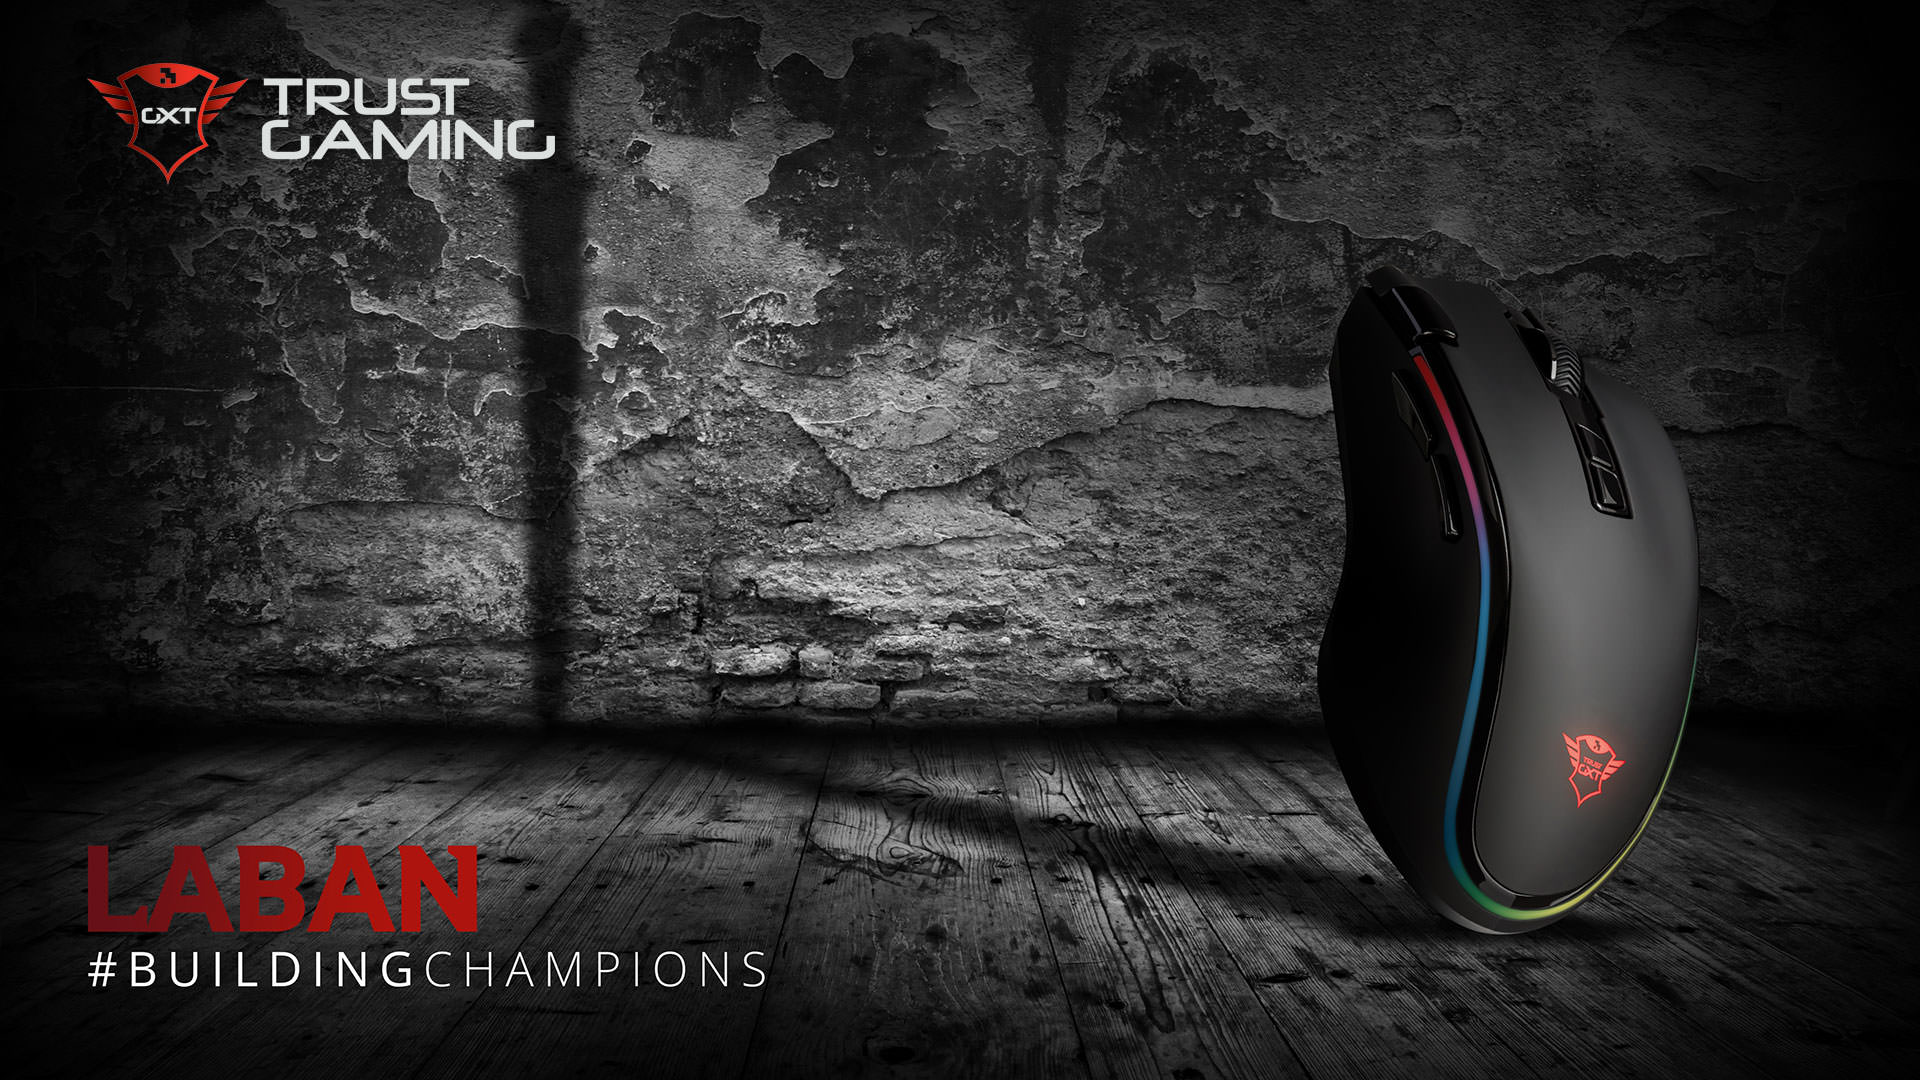 Trust Gaming Gxt 1 Laban Rgb Gaming Mouse Review